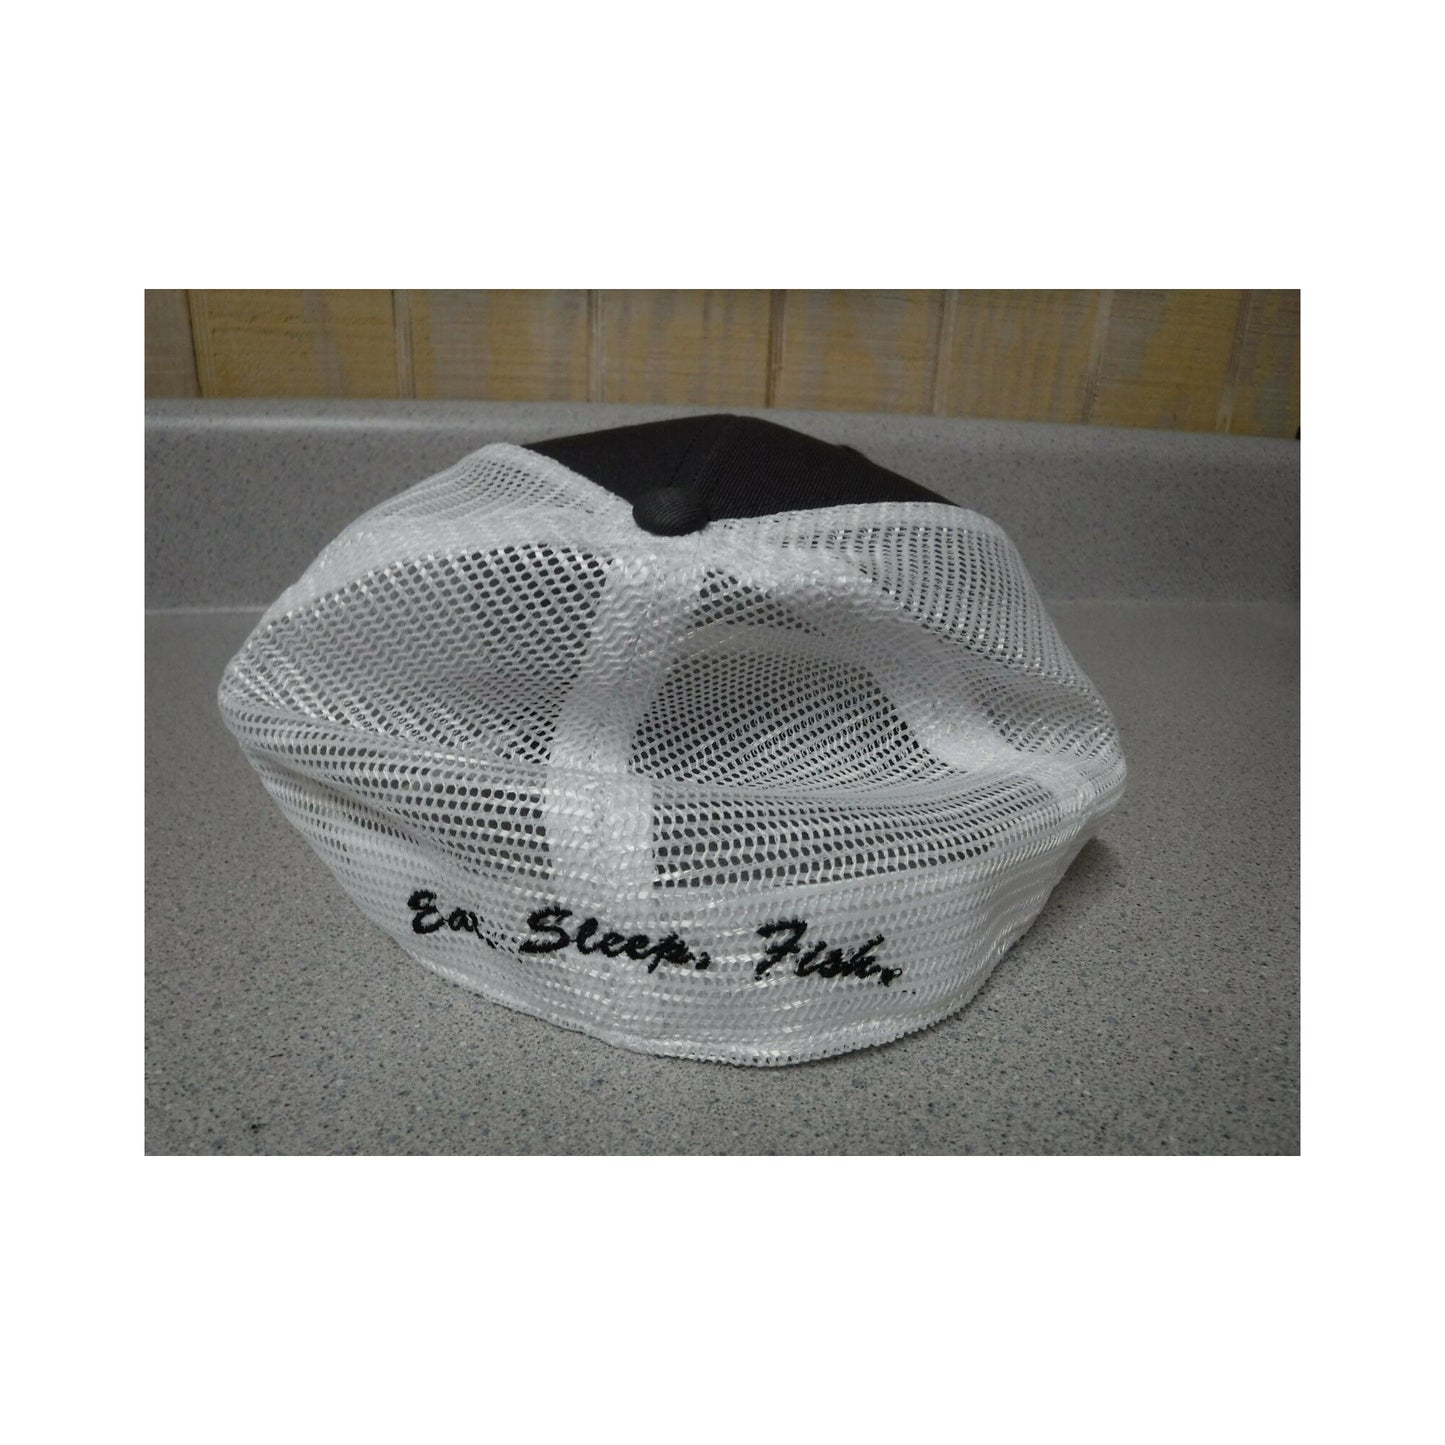 New Authentic Skeeter Hat Limited Edition/ Front Charcoal/ Back White Mesh Large/ XL